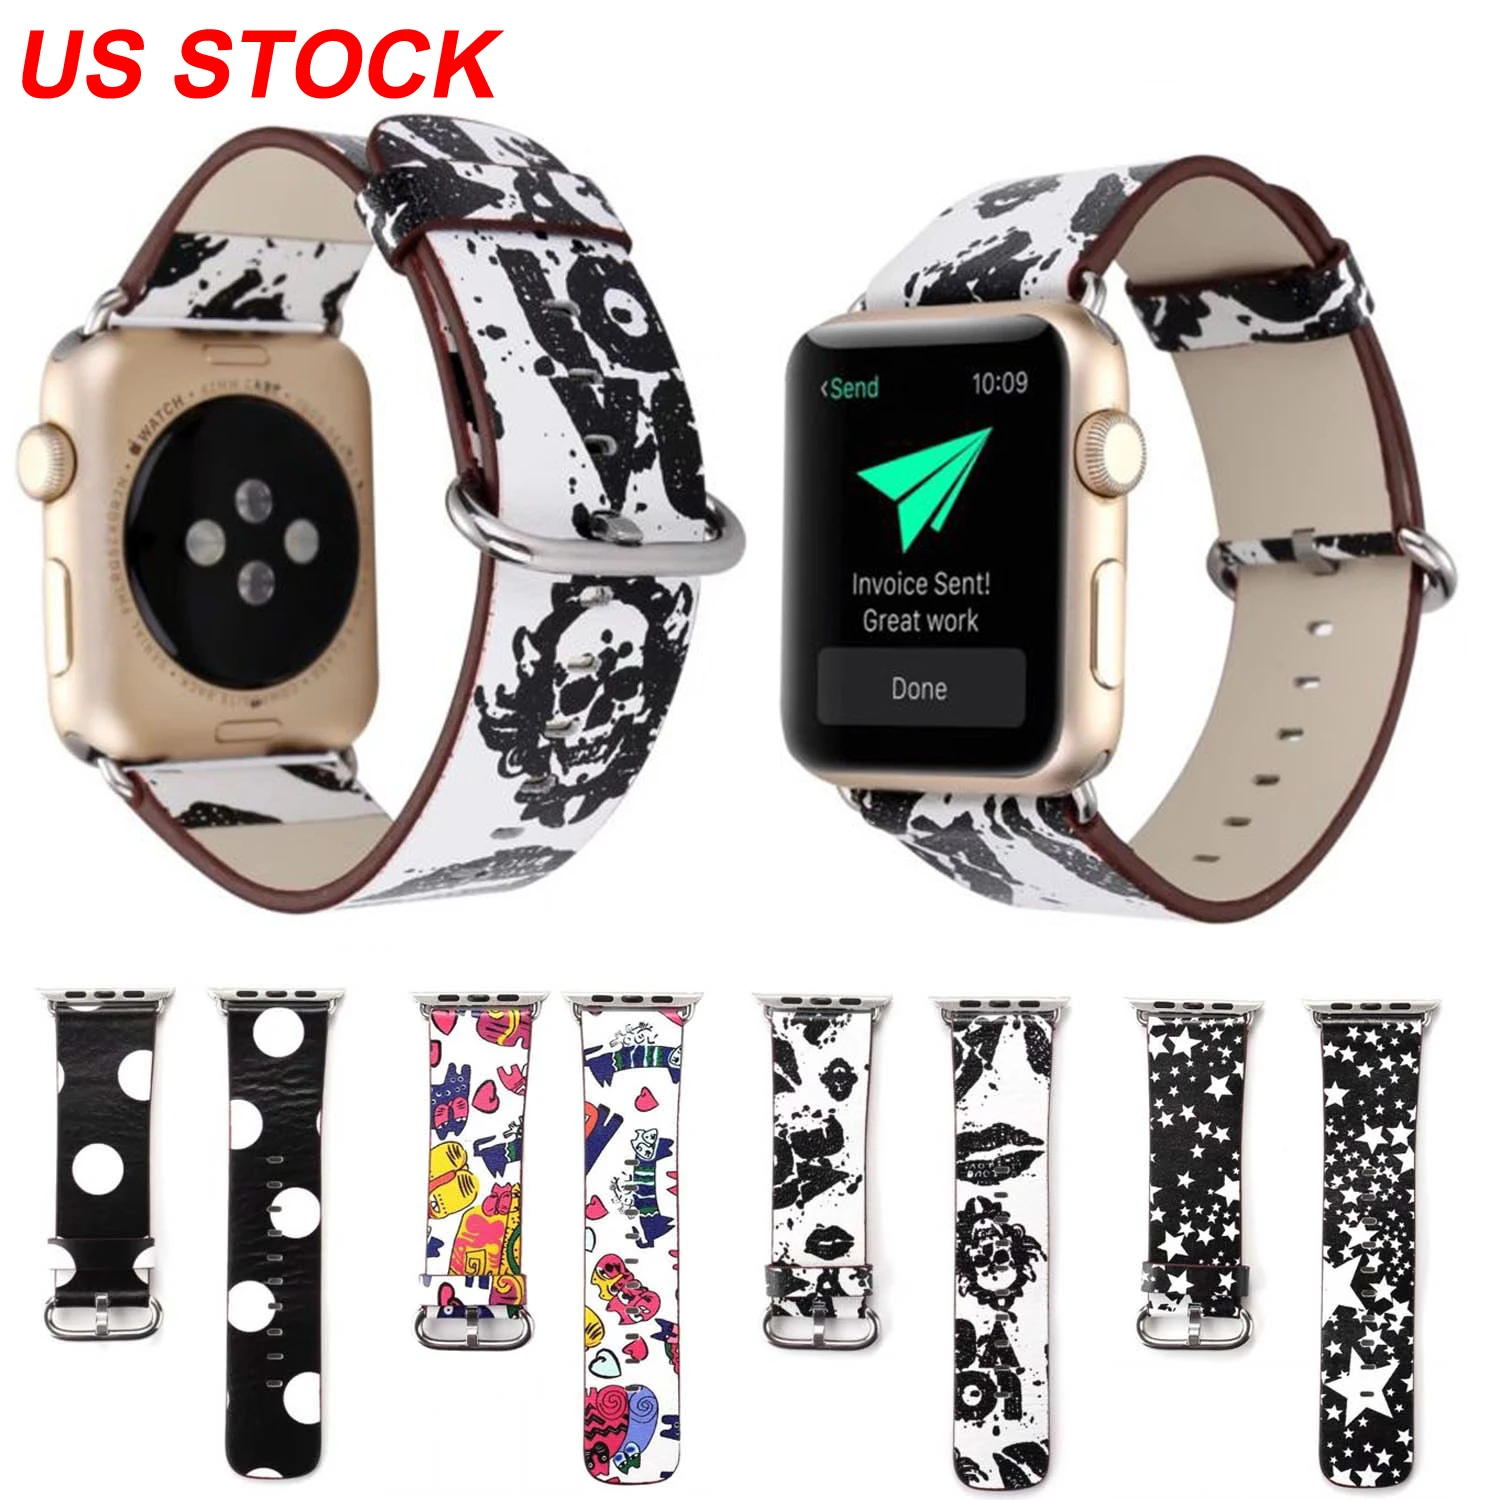 

Rock Stars Skulls PU Leather Band for Apple Watch Series 3 2 1 Wristbands 38mm 42mm Colorful Cats Dots Bracelet for iWatch Belt